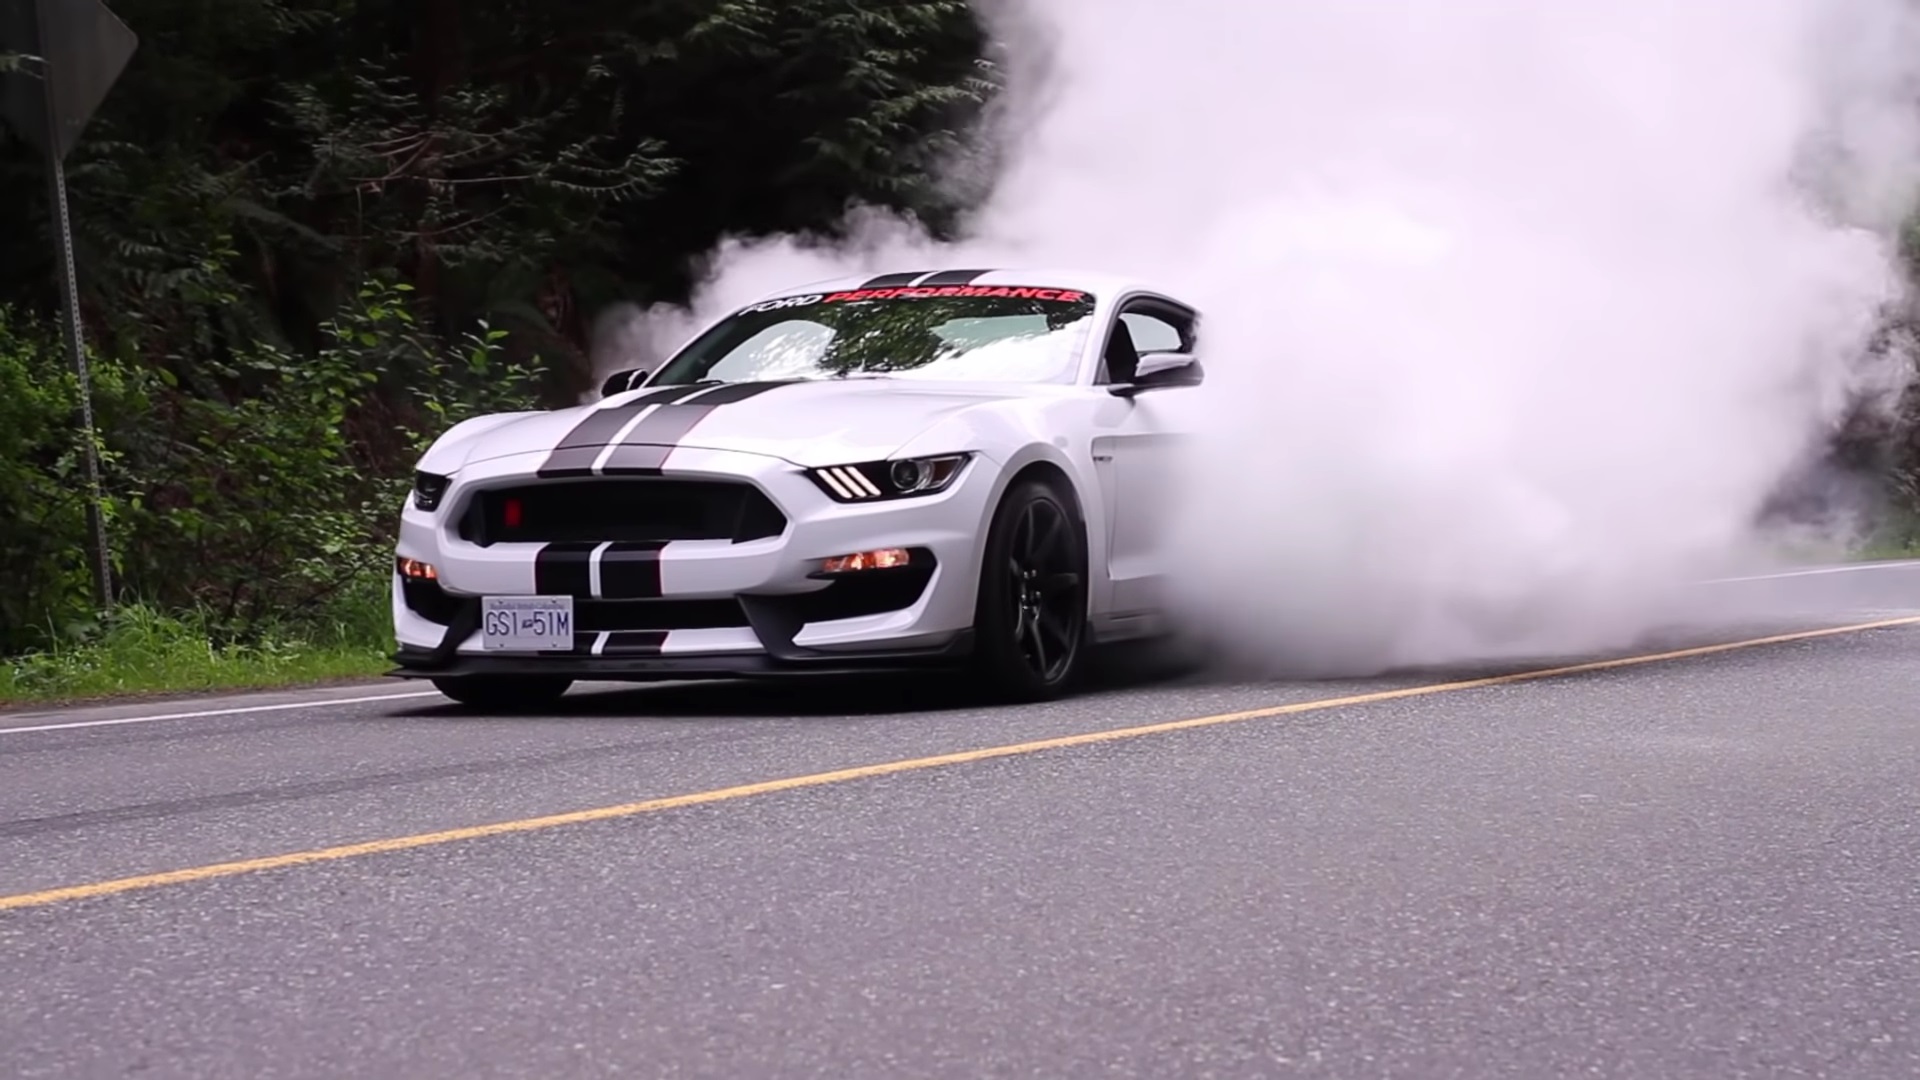 Video: 2018 Ford Mustang Shelby GT350R - The Last Great Mustang Ford Will Ever Build?